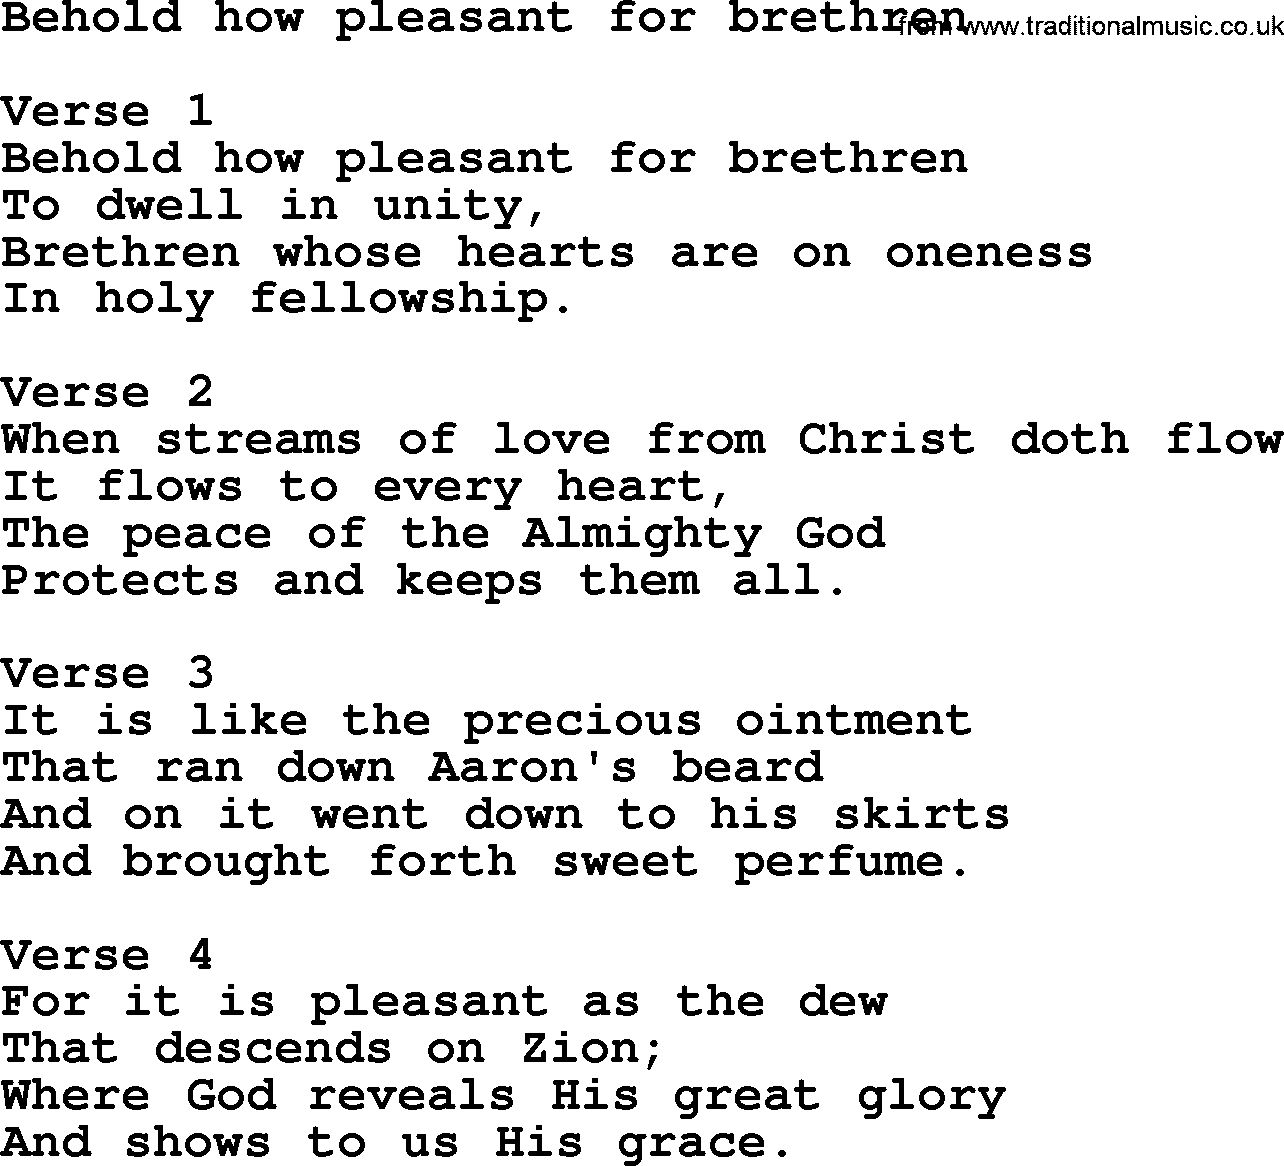 Apostolic and Pentecostal Hymns and Gospel Songs, Hymn: Behold How Pleasant For Brethren, Christian lyrics and PDF